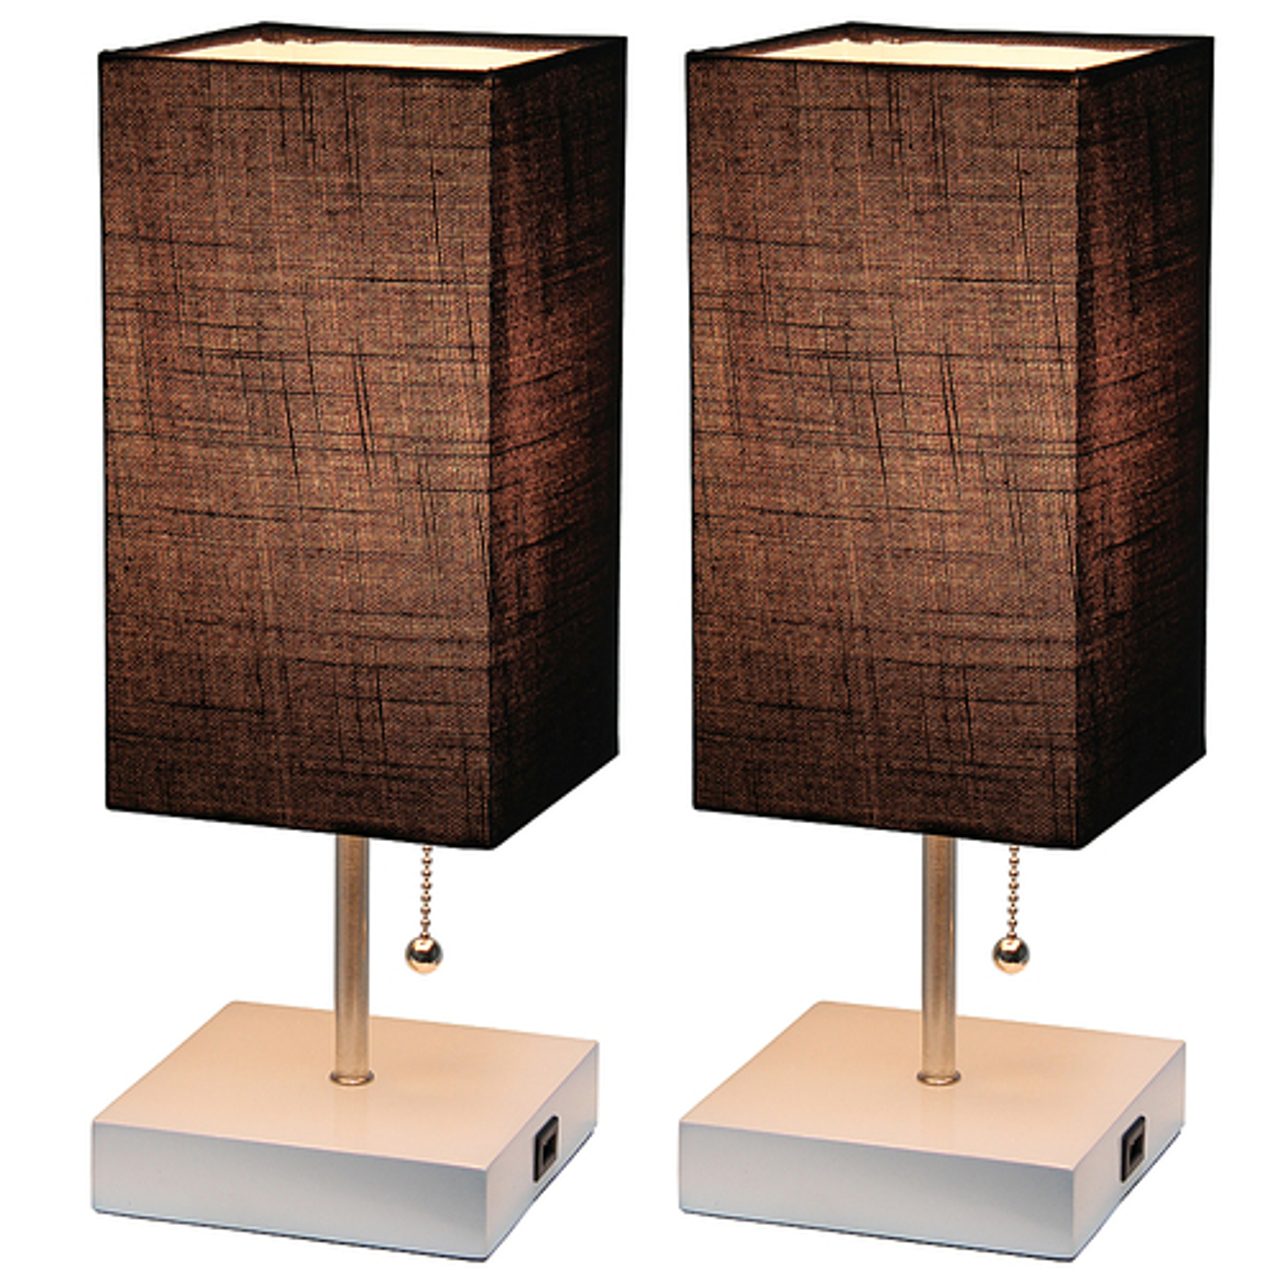 Simple Designs Petite White Stick Lamp with USB Charging Port and Fabric Shade 2 Pack Set, Black - White base/White shade